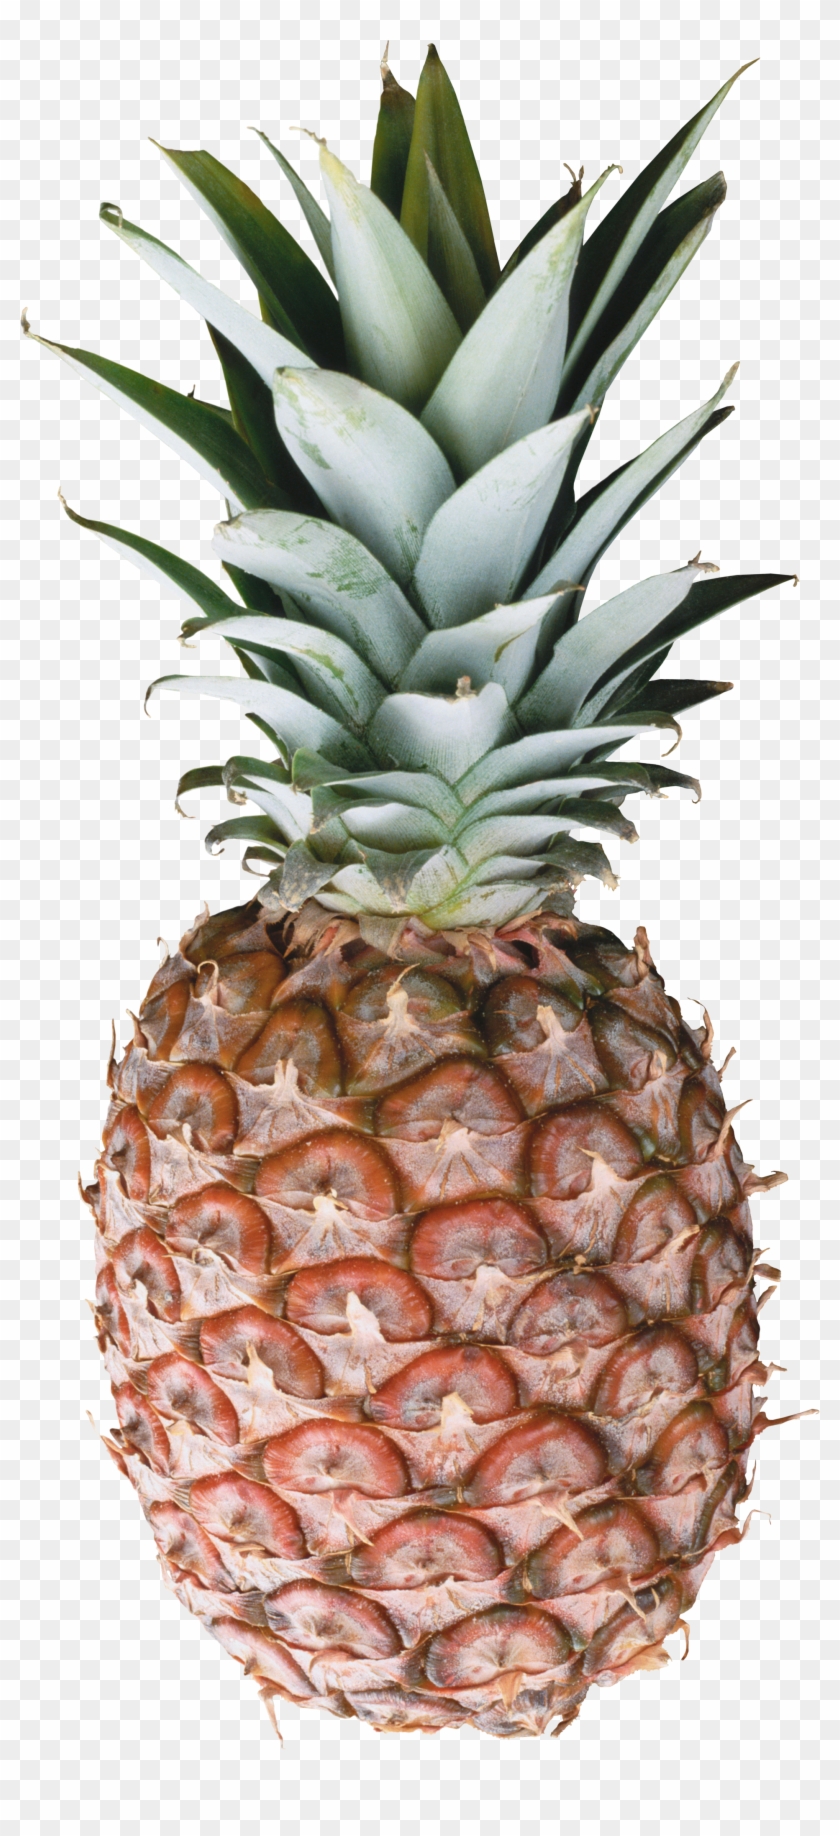 Pineapple Clipart Different Fruit - Pineapple Png #385243